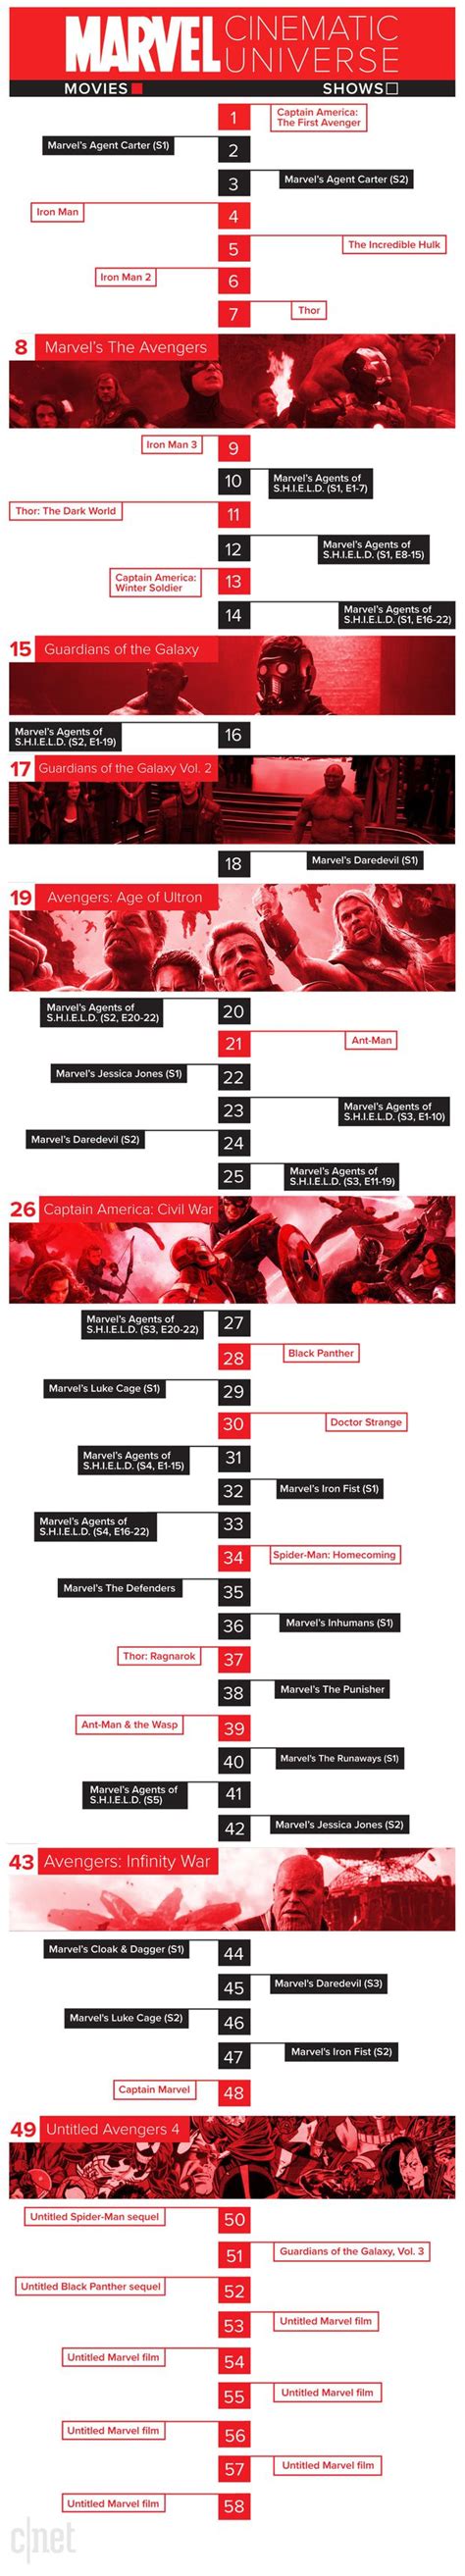 In the words of tony stark, part of the journey is the end…but that journey would certainly be less confusing if viewed in proper chronological story done watching all 23 marvel movies in order of story? MCU Movie schedule: Marvel movies 2019 and beyond